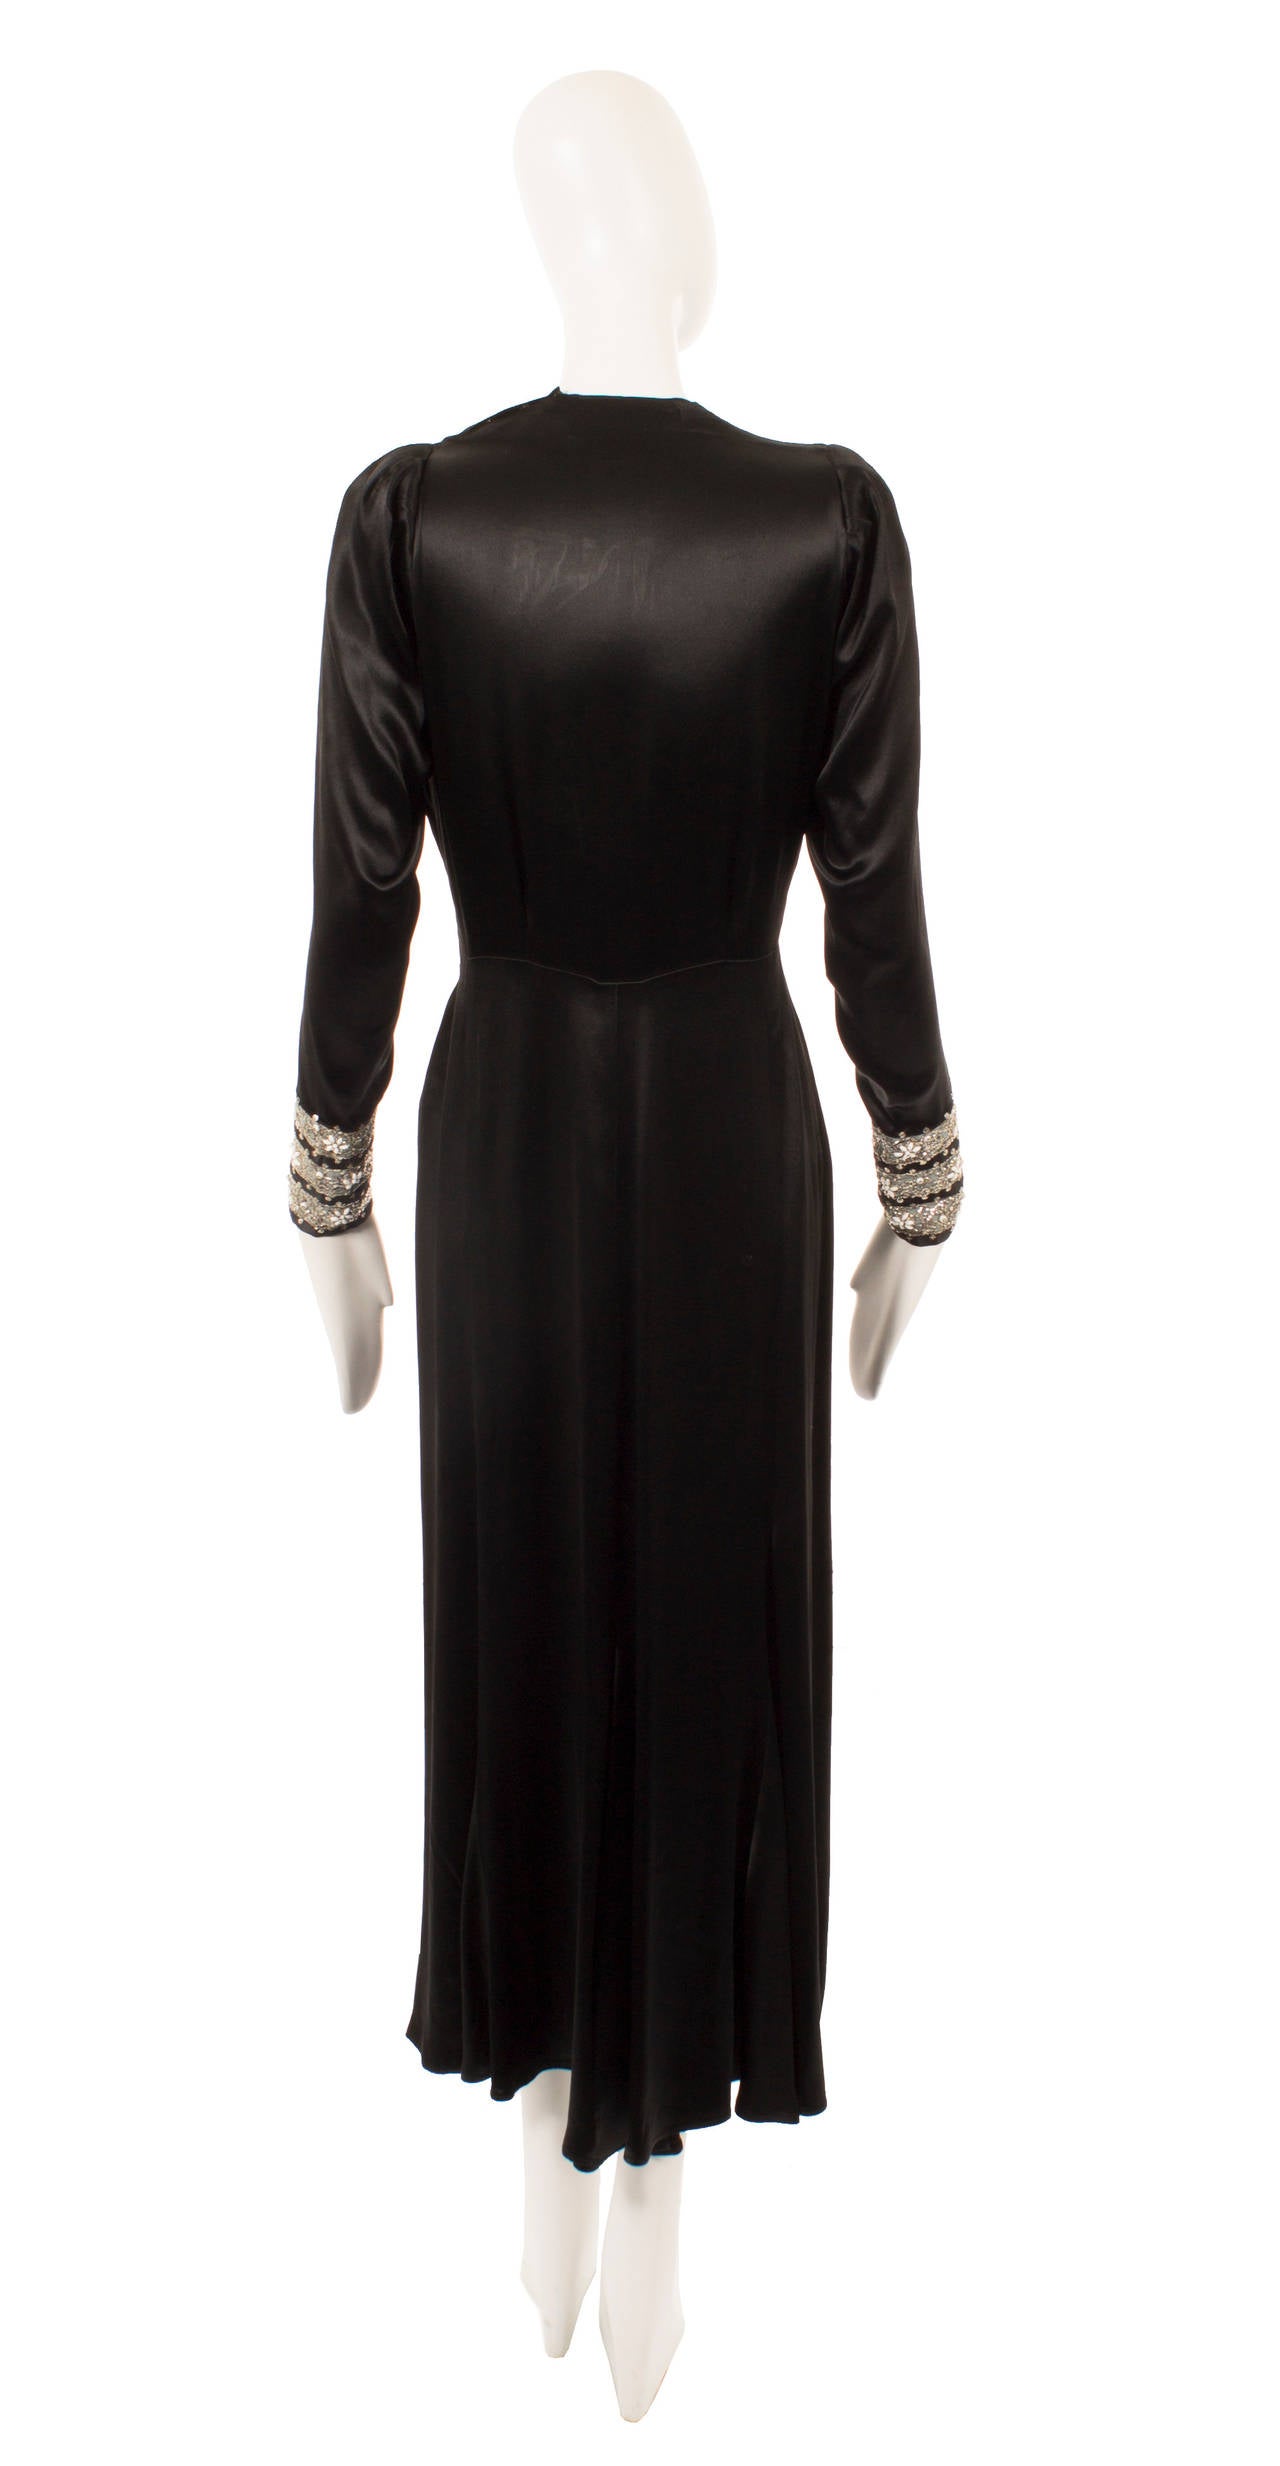 1938 evening gown